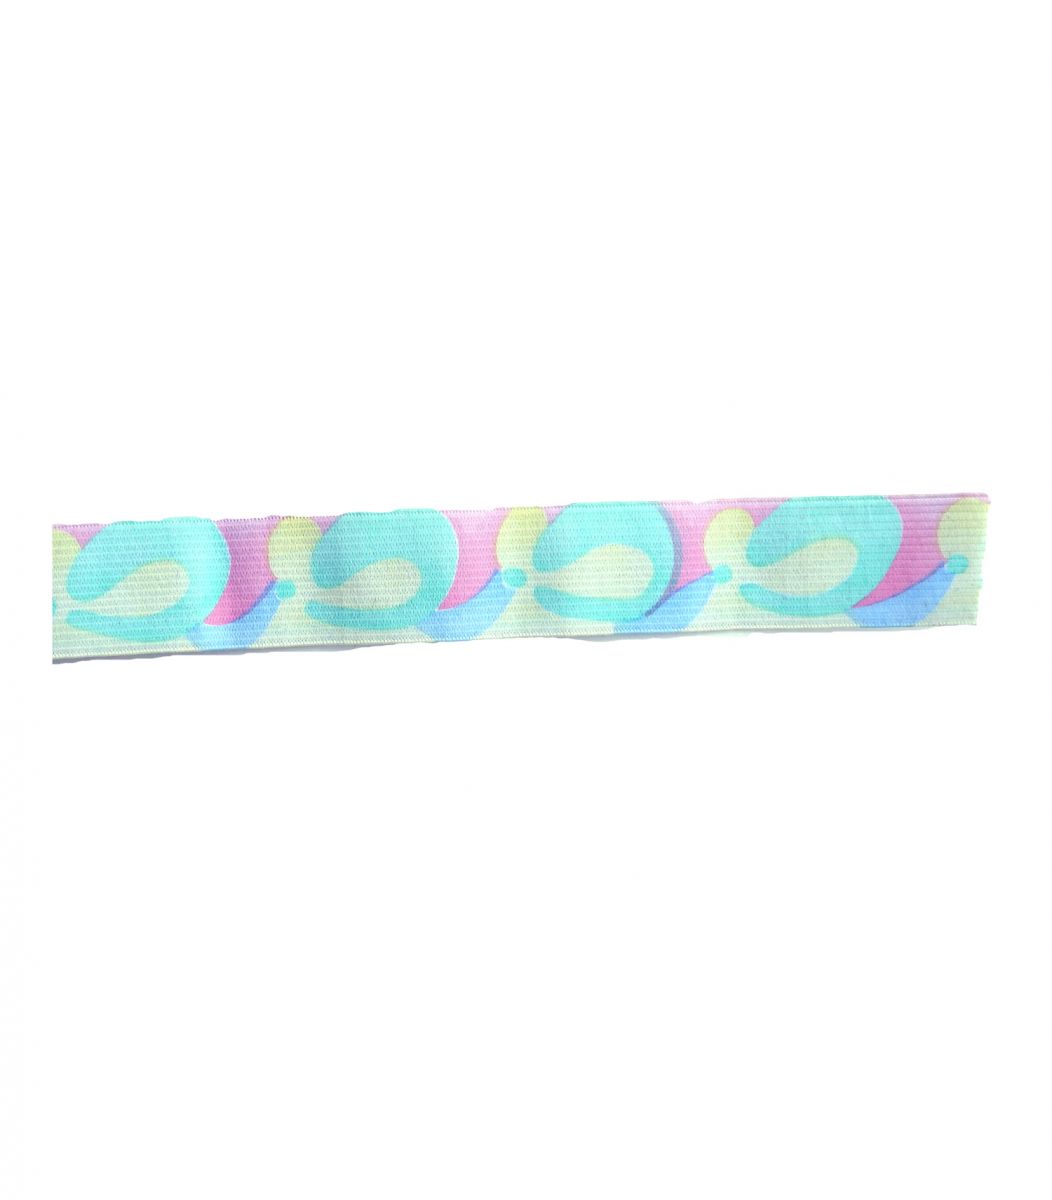  Rubber Band  Rubber Band Colorful 20mm Rub20-a-1